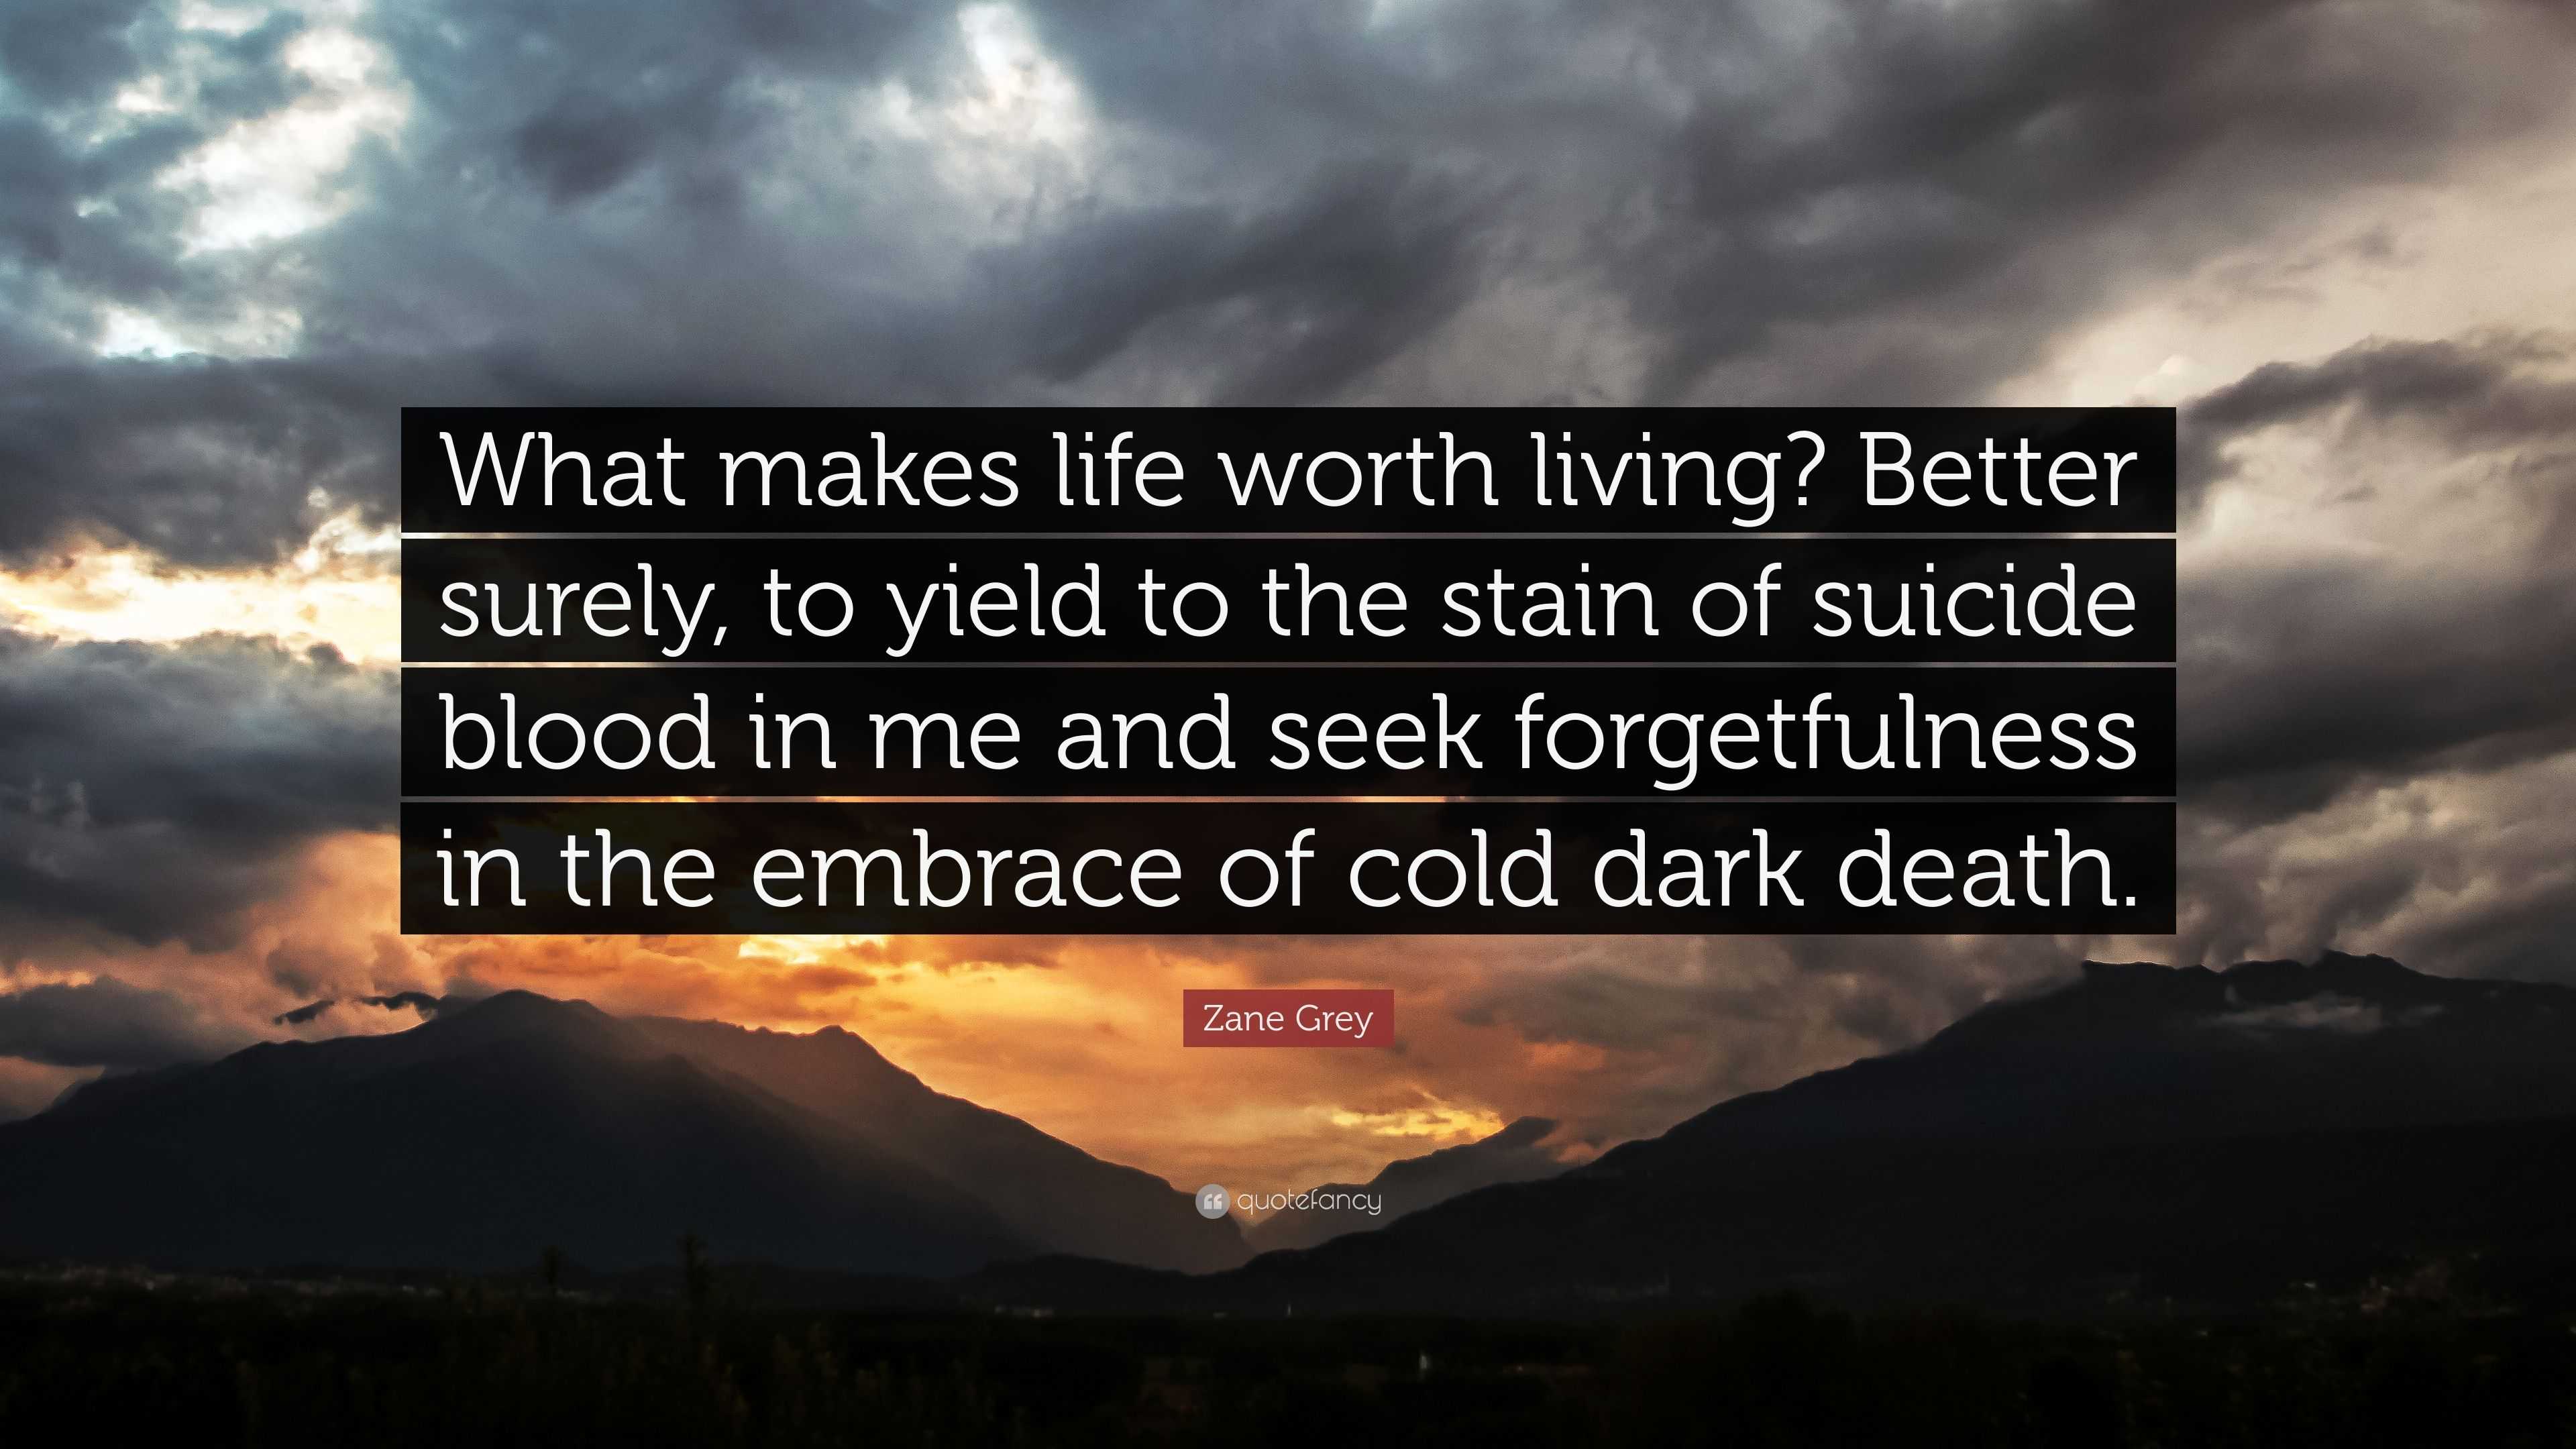 Zane Grey Quote “What makes life worth living Better surely to yield